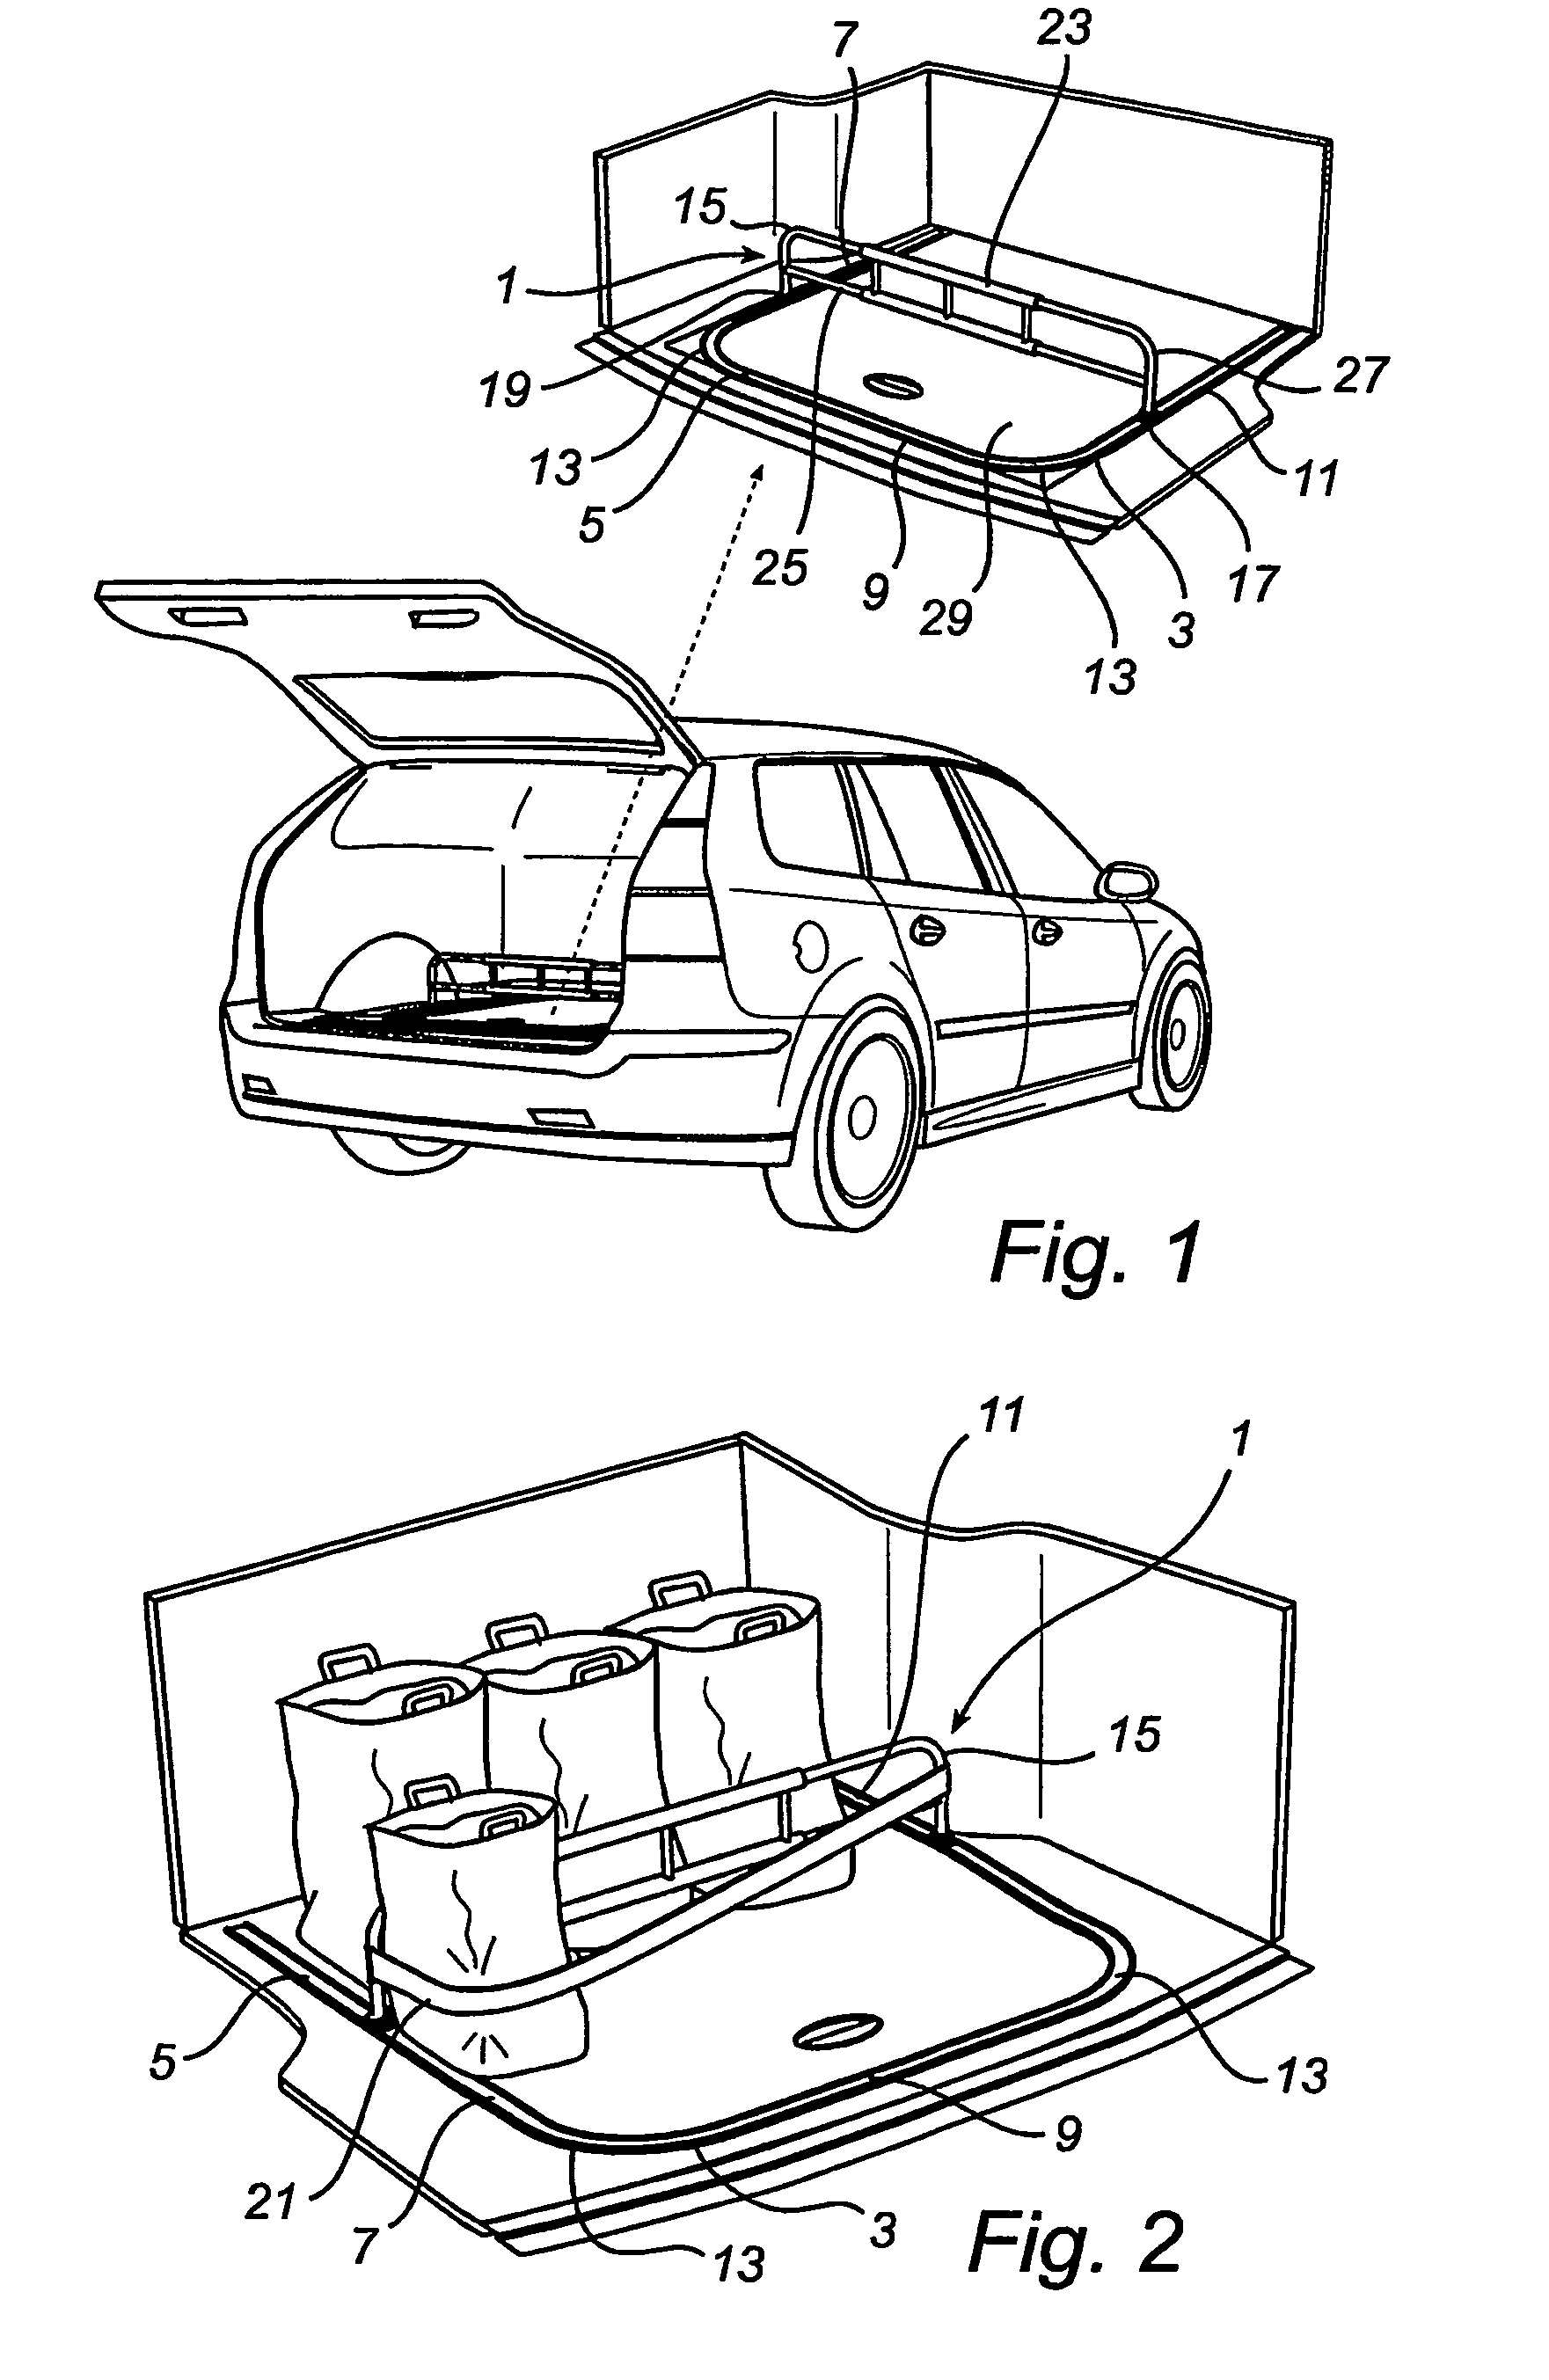 Load device for vehicles